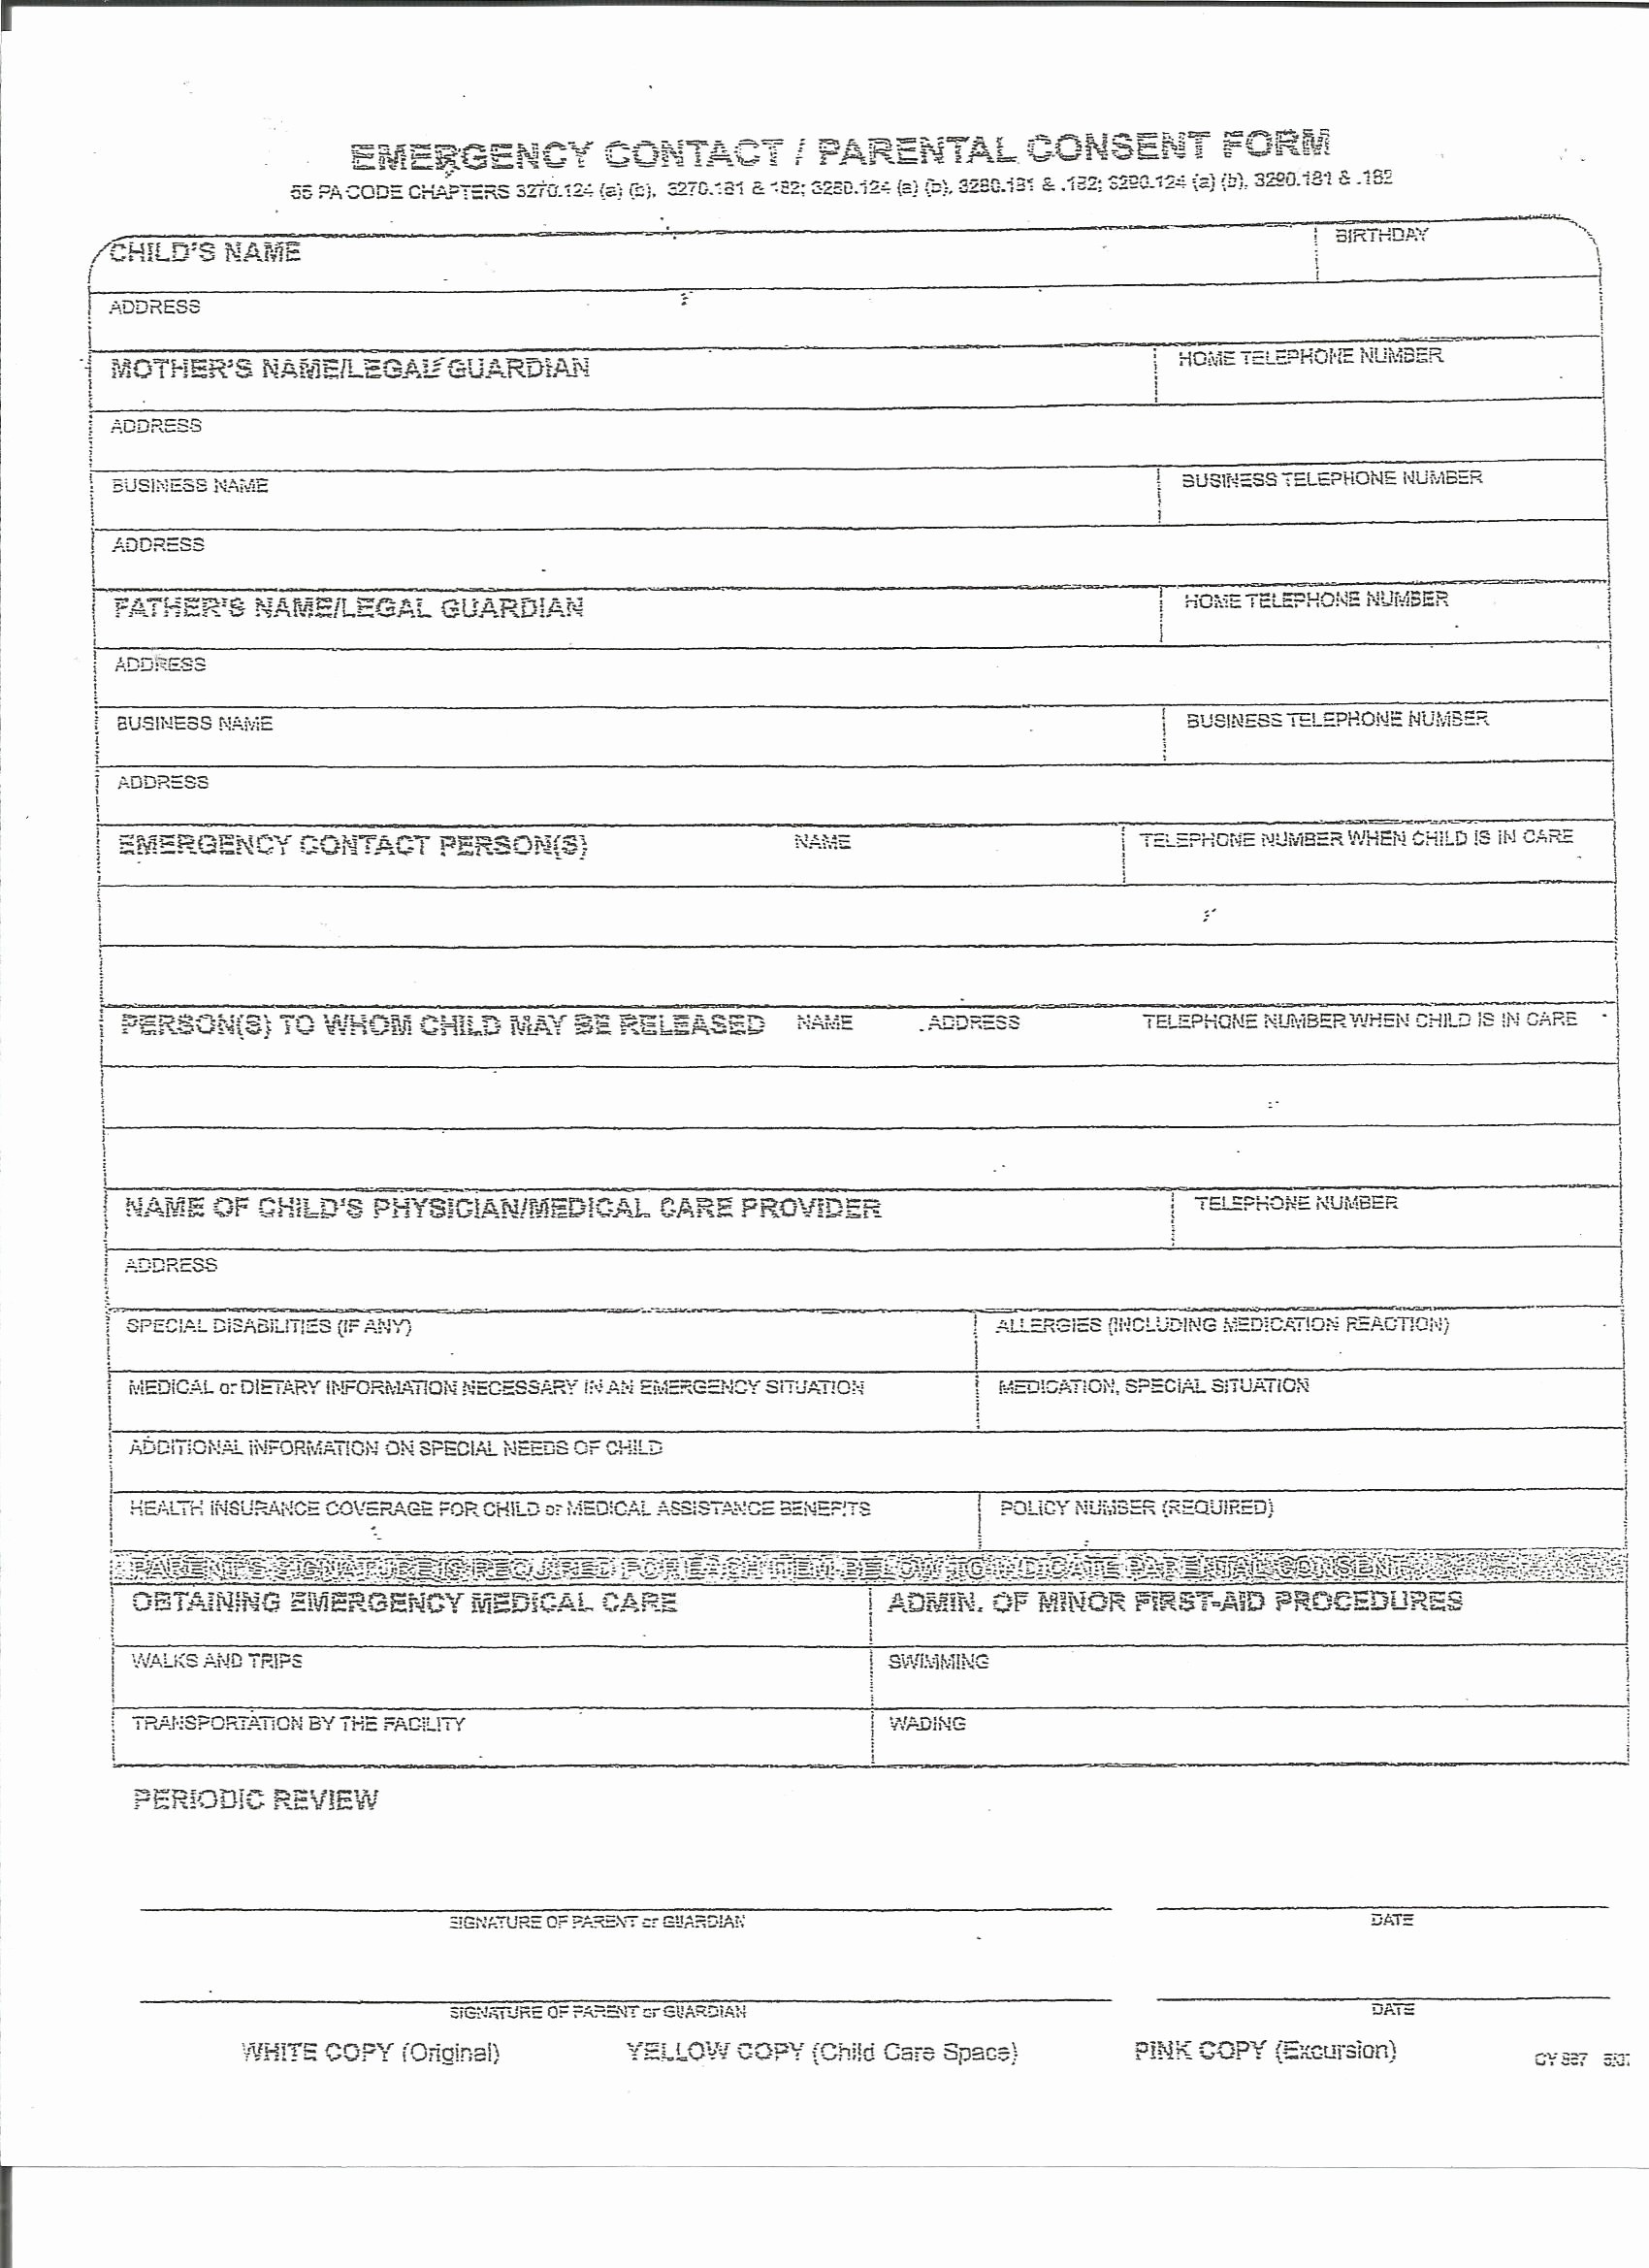 Emergency Contact forms for Children New Cocalico Care Center Enrollment